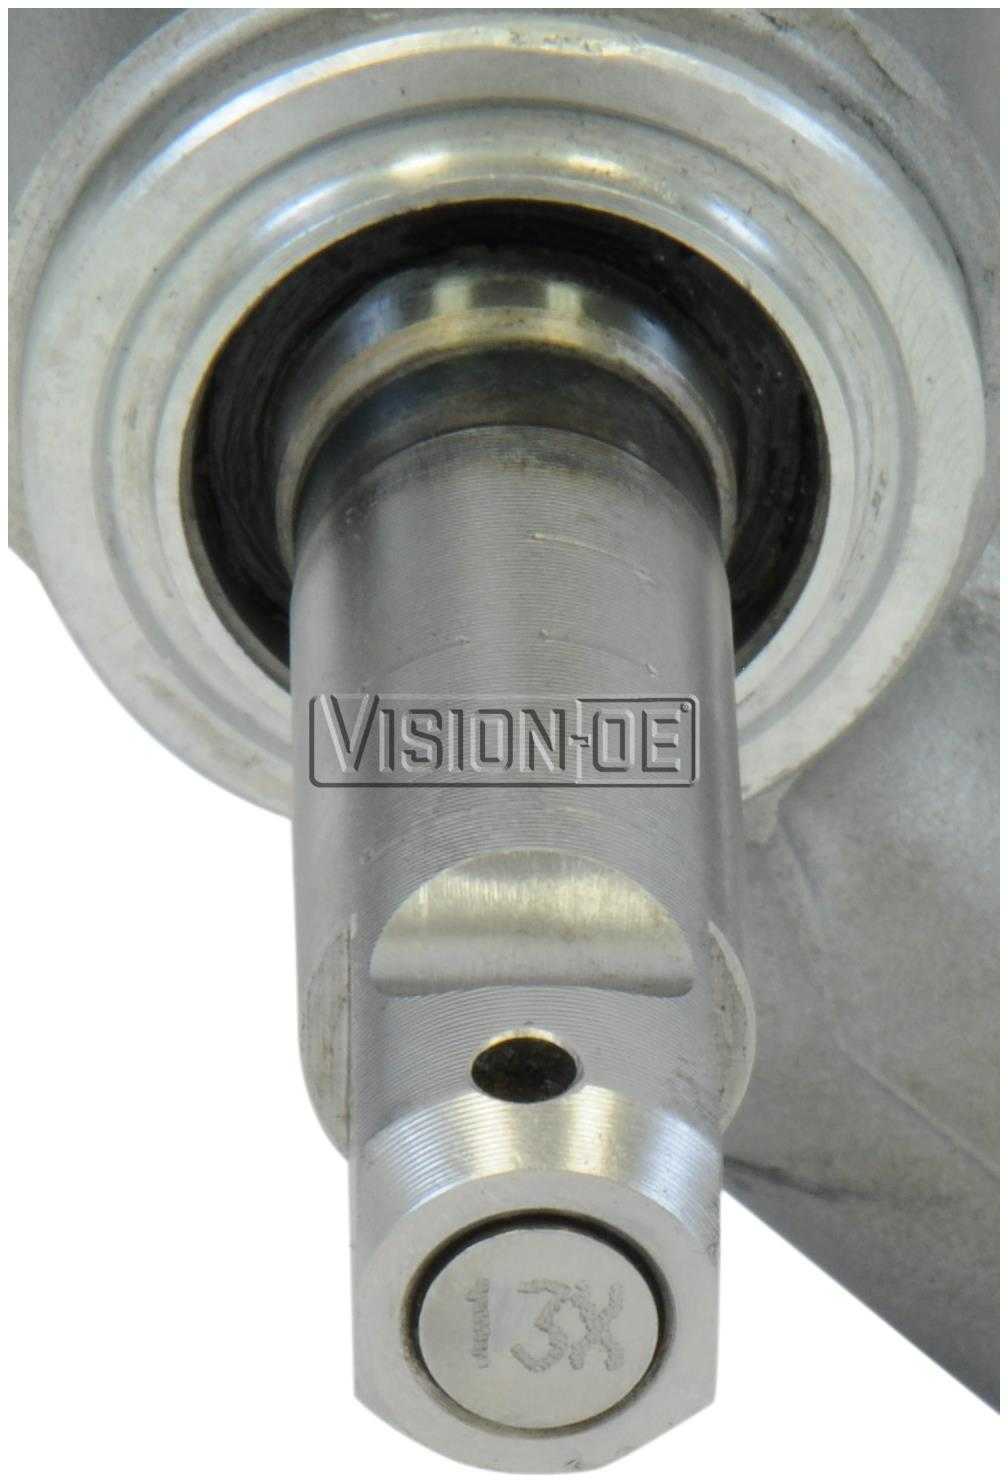 VISION-OE - Reman Rack and Pinion - VOE 102-0252